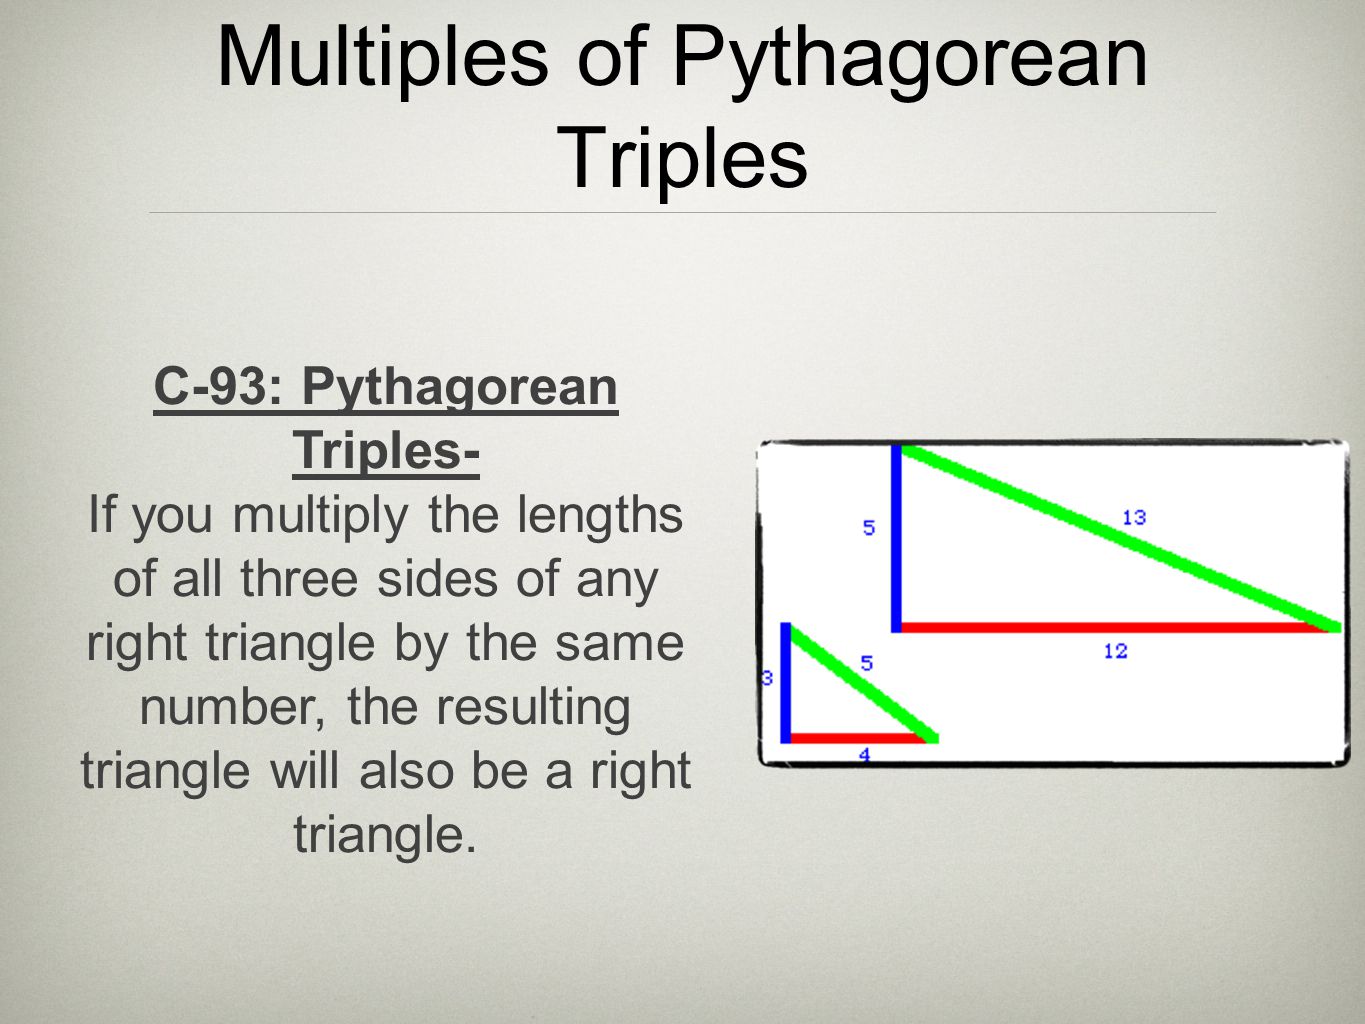 Multiples of Pythagorean Triples